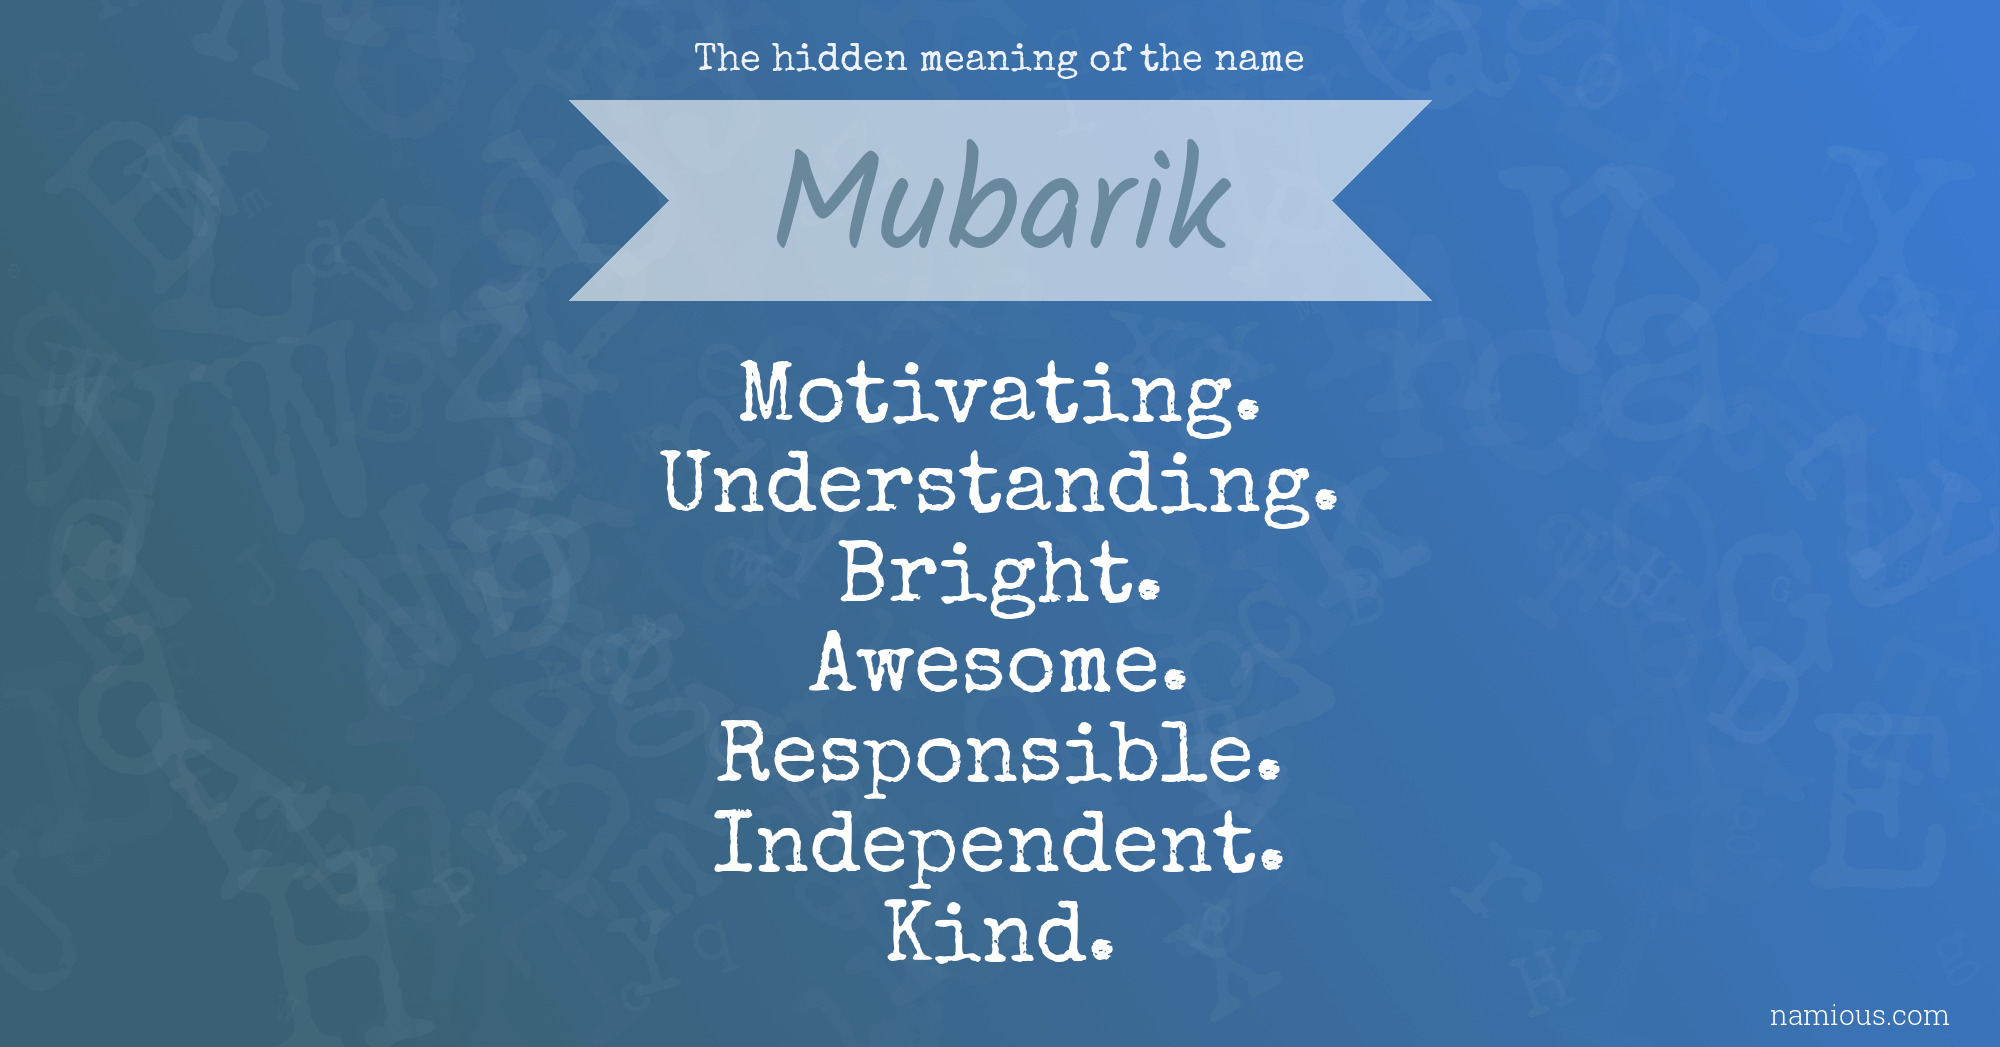 The hidden meaning of the name Mubarik